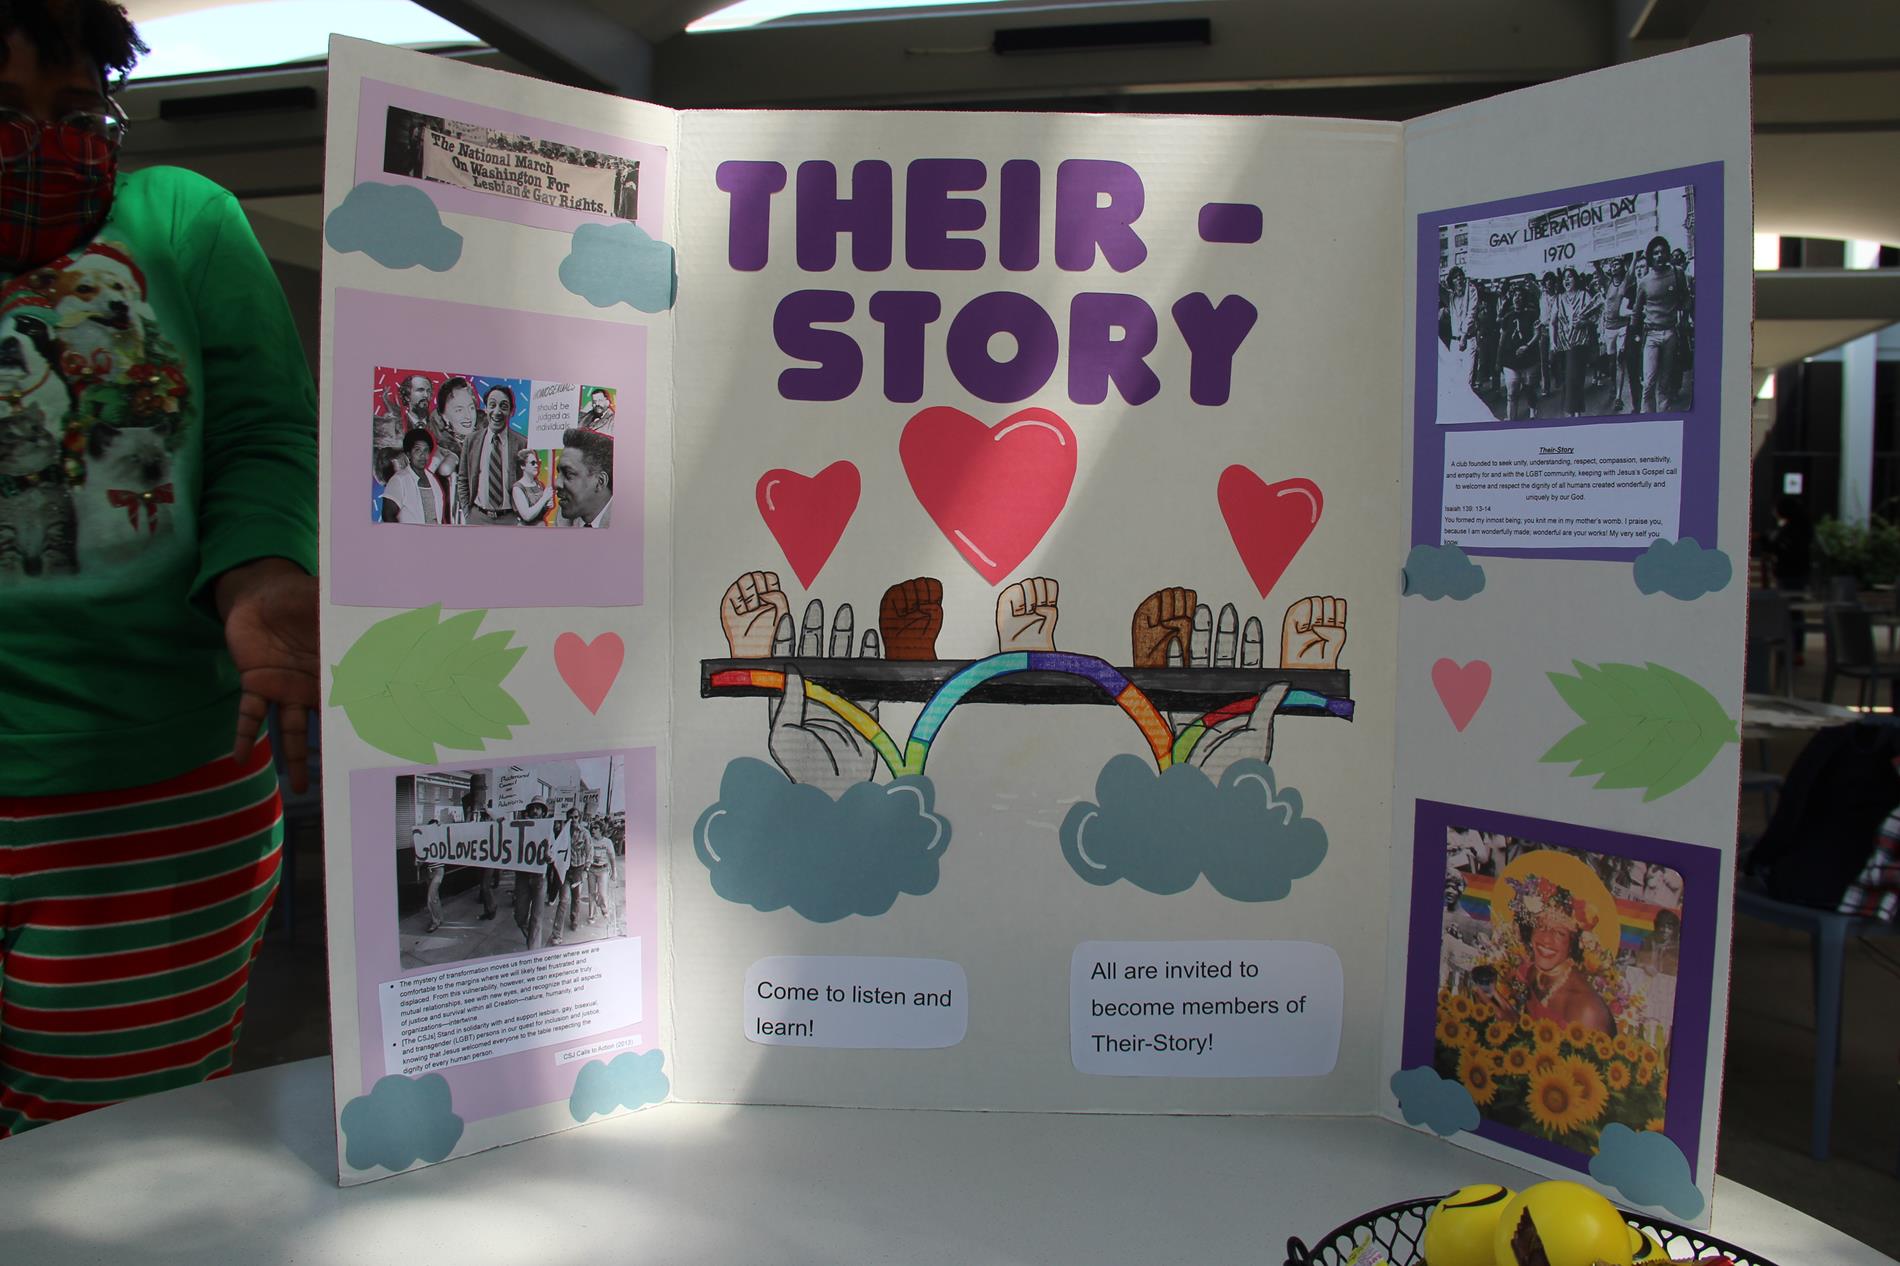 Their-Story poster